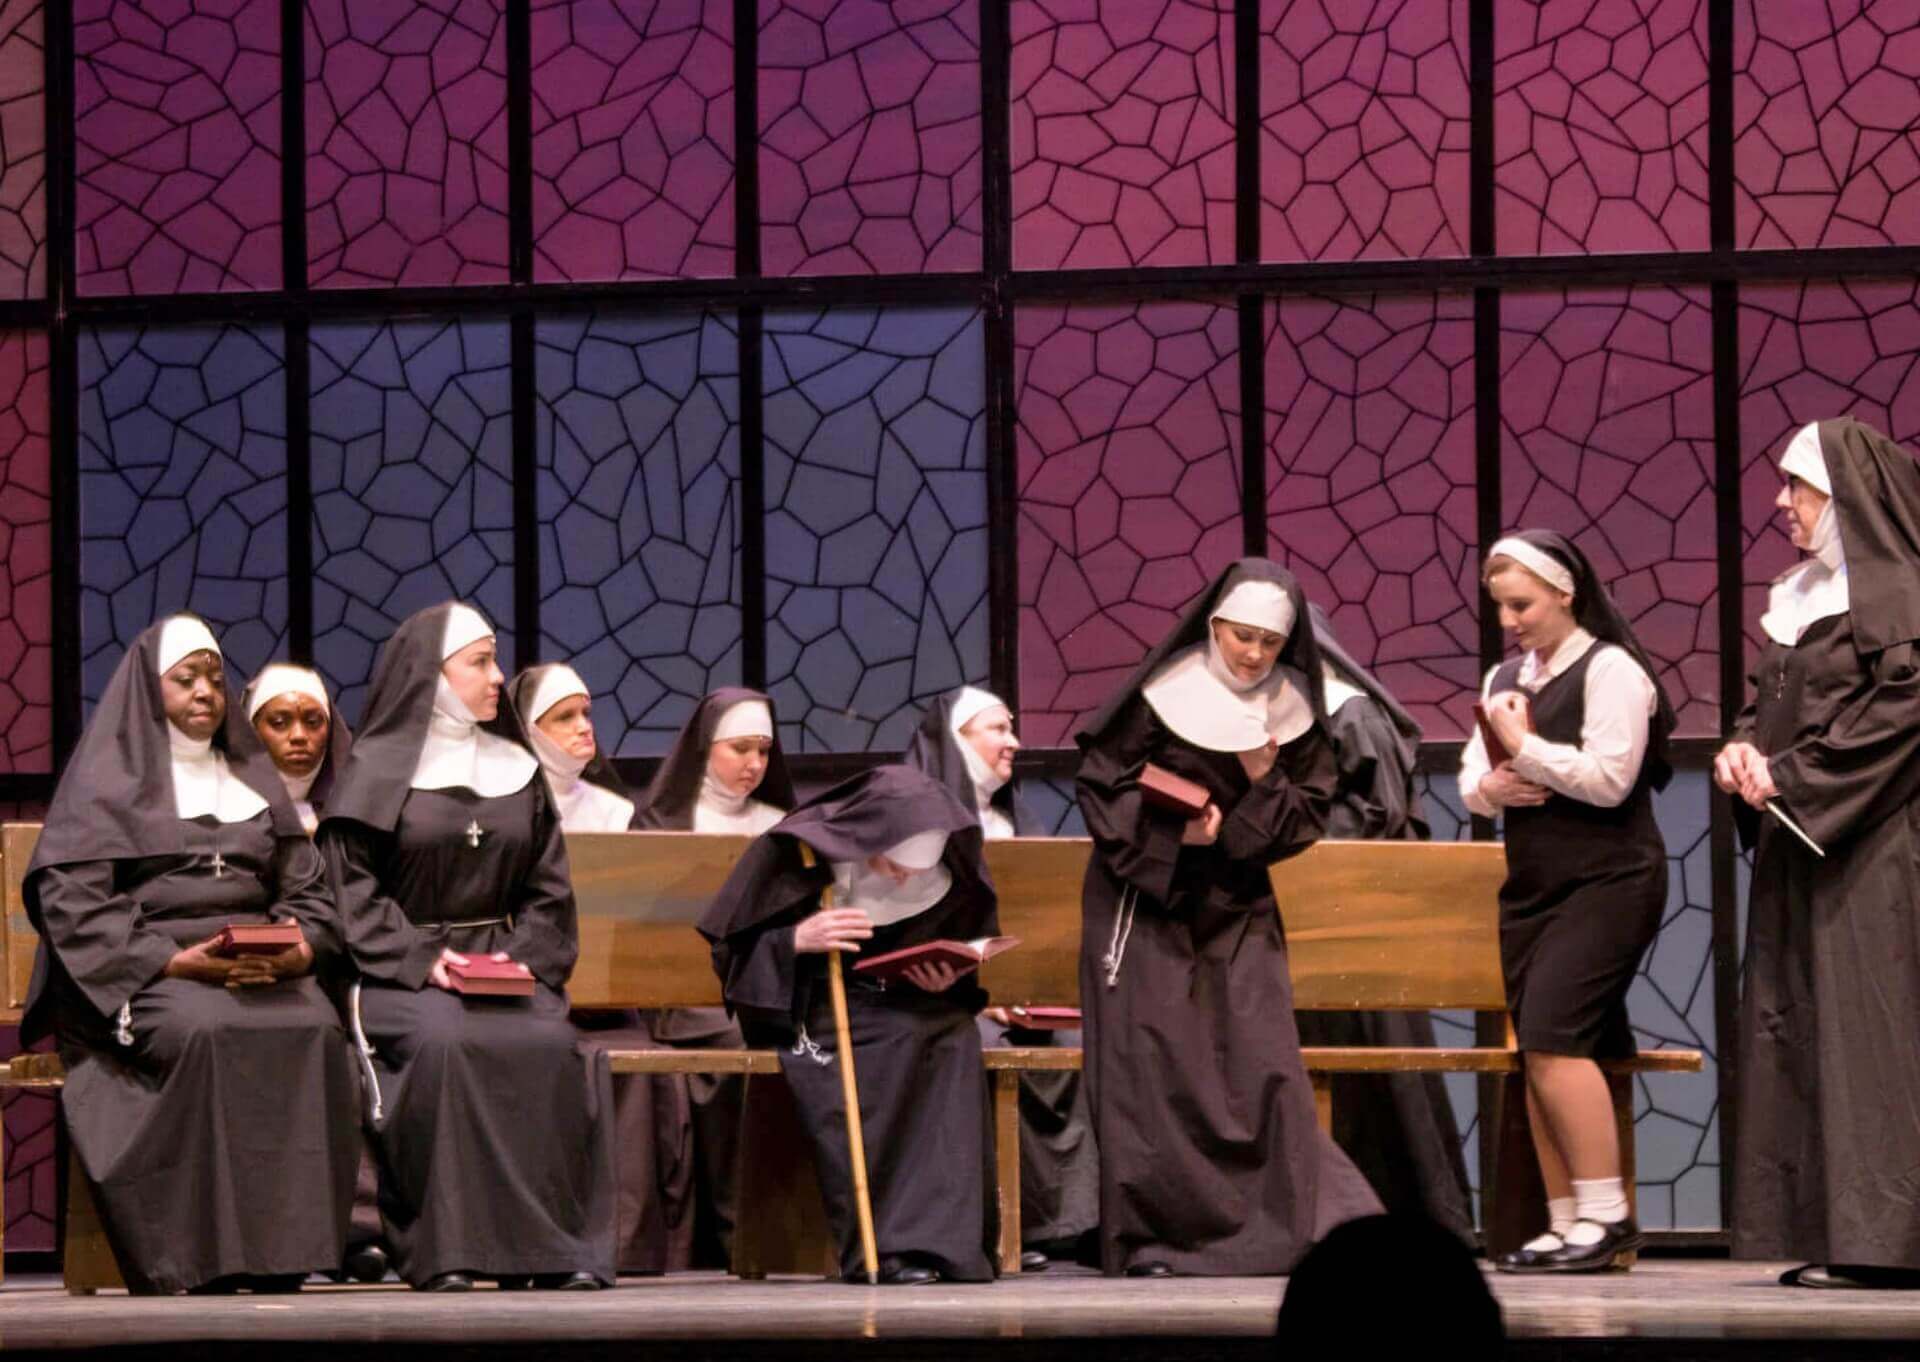 Joey Costume - Sister Act Costume Rental pictures - Stagecraft Theatrical